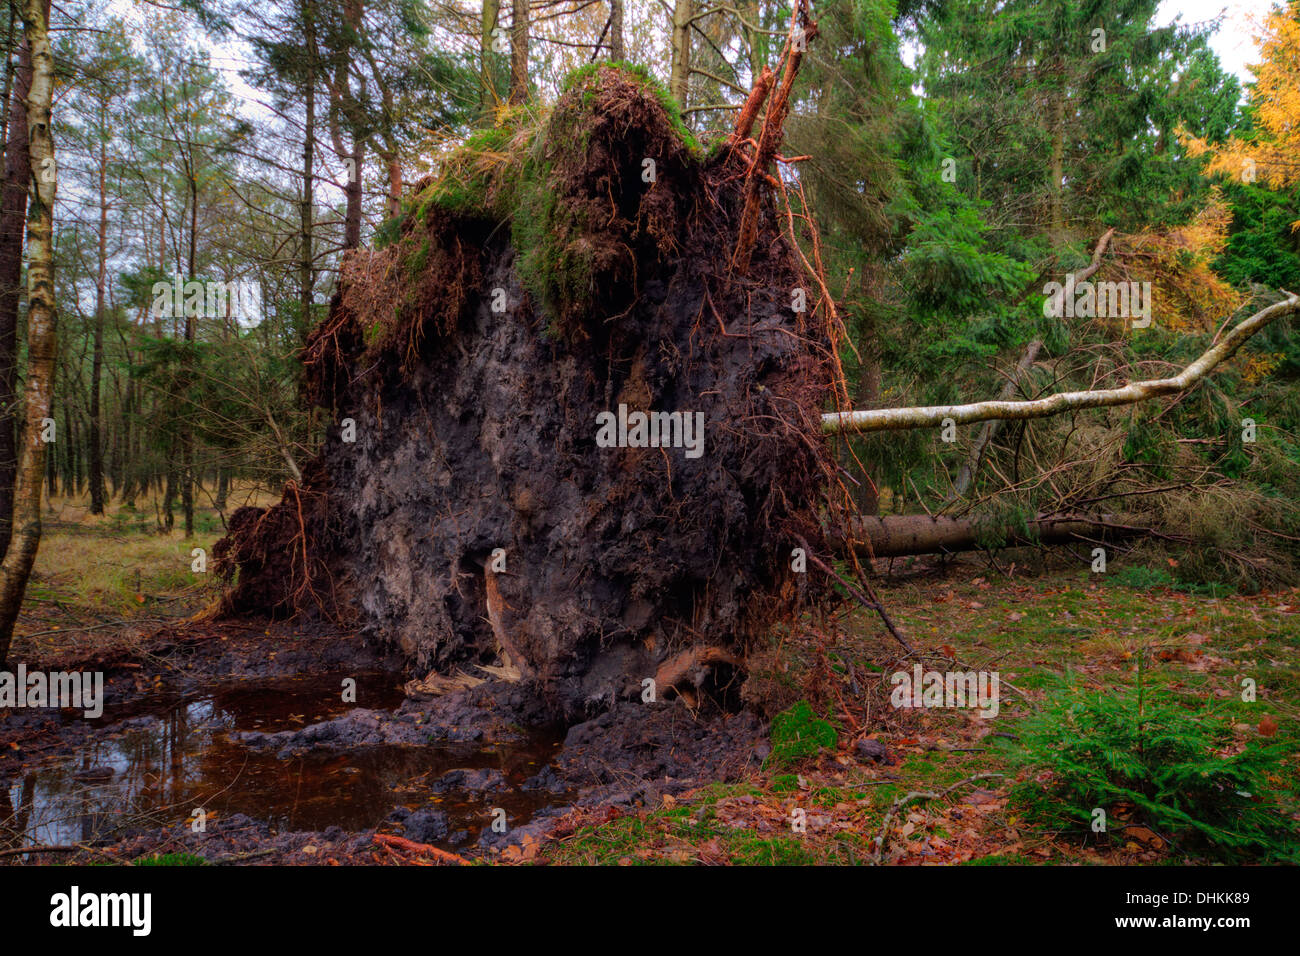 Fallen trees, uprooted by a storm, in a forest Stock Photo